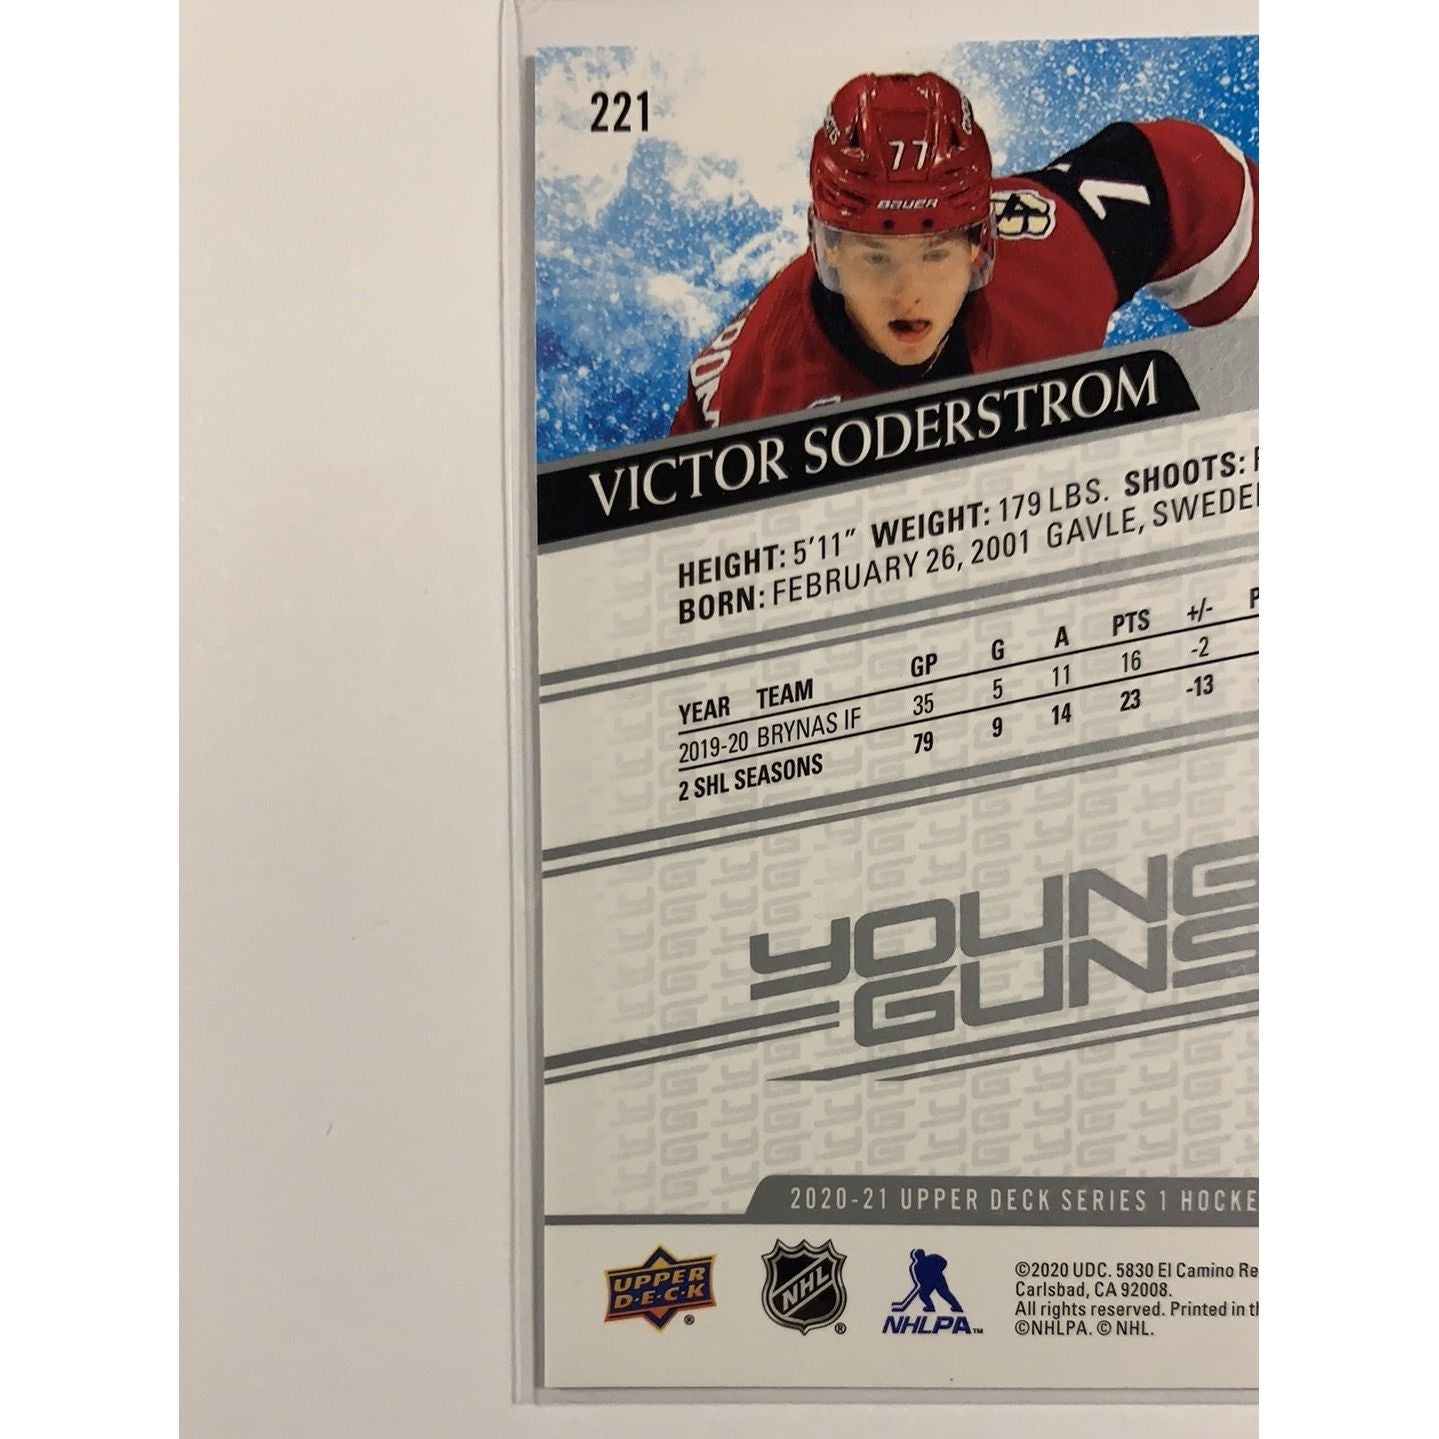  2020-21 Upper Deck Series 1 Victor Soderstrom Young Guns  Local Legends Cards & Collectibles